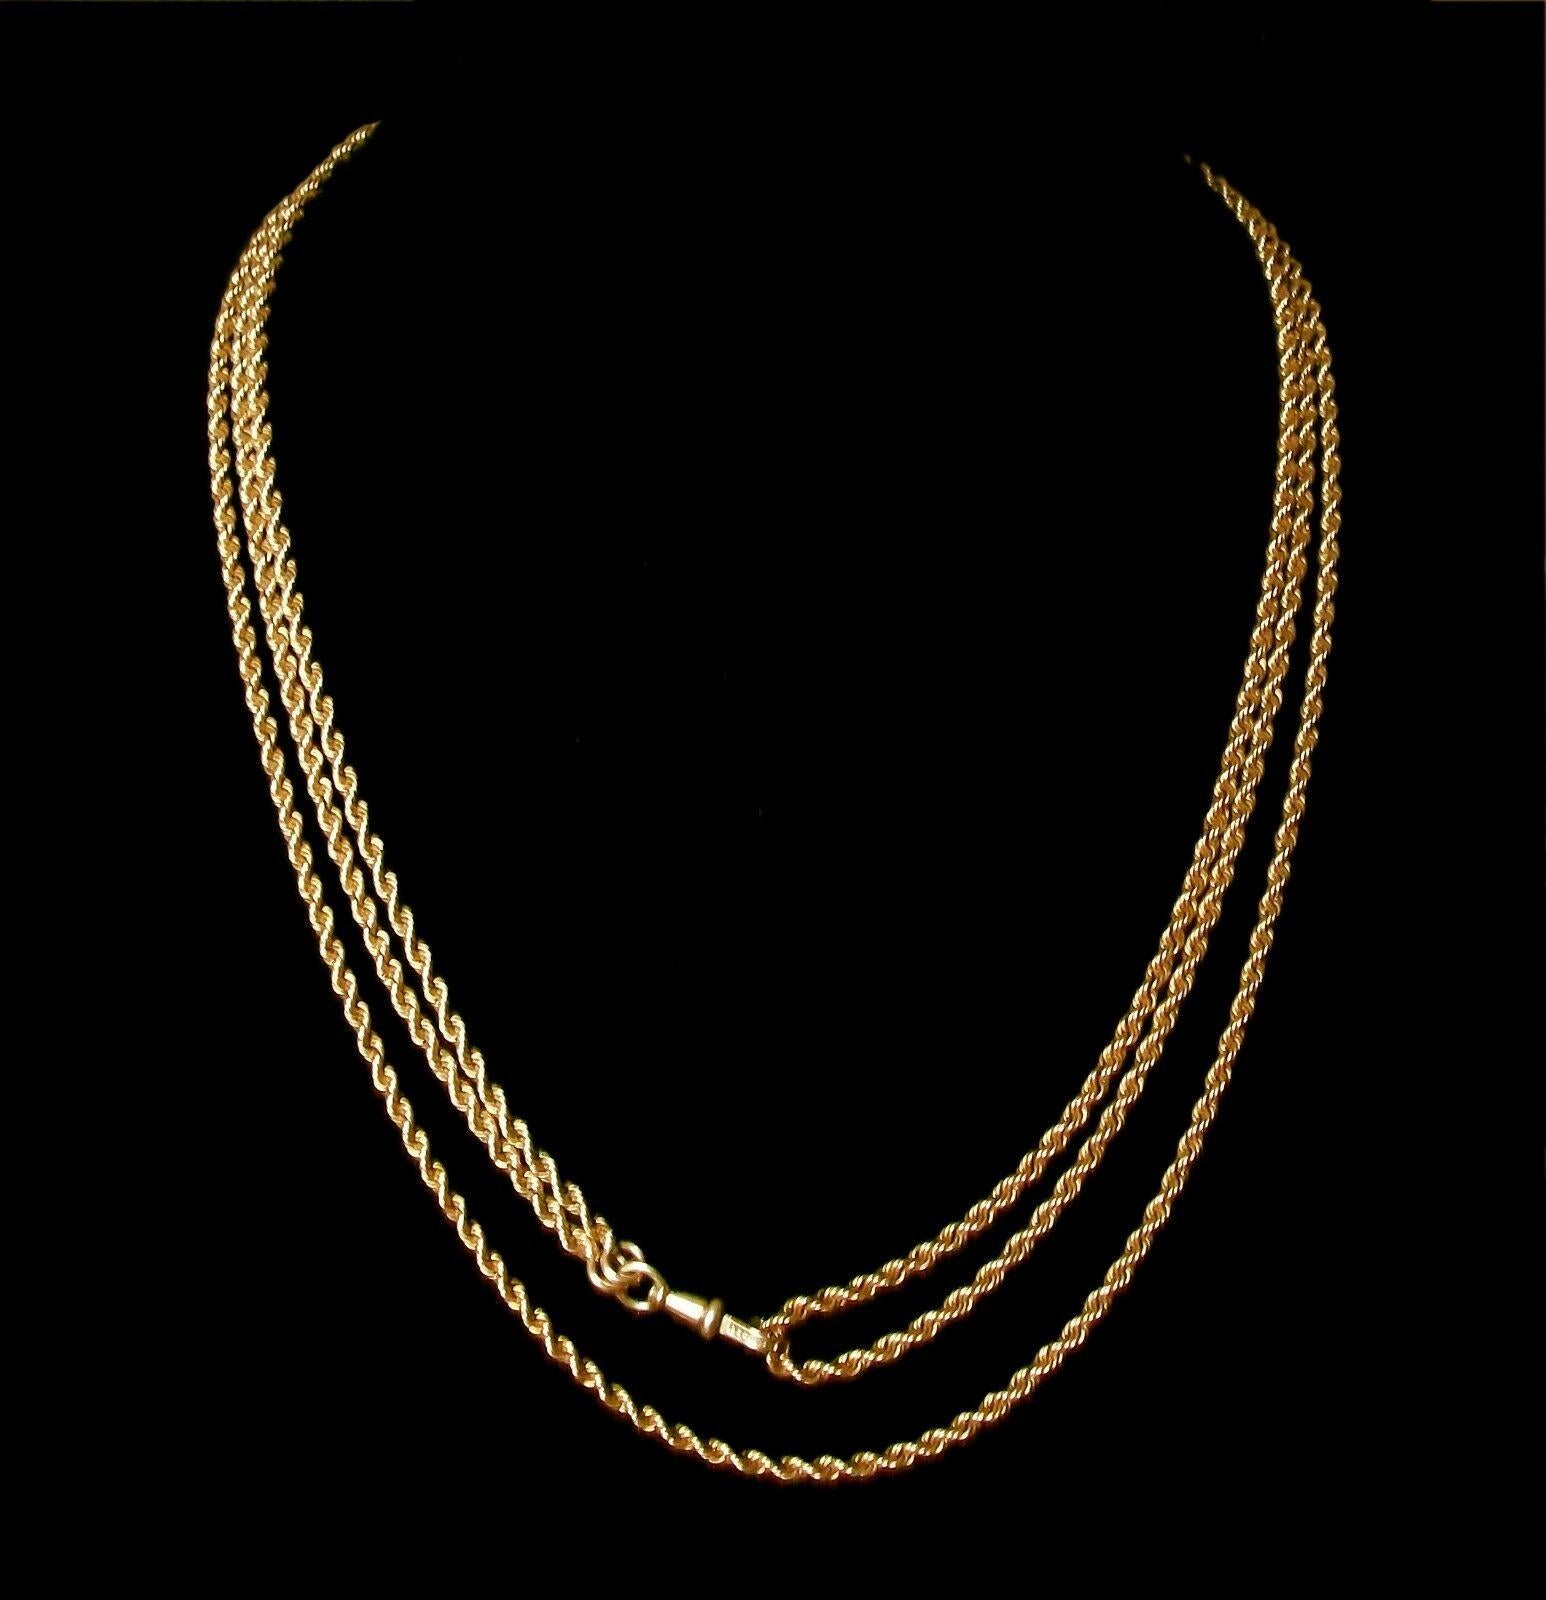 Women's or Men's Victorian Gold Rope Twist Pocket Watch Chain / Necklace, U.S, circa 1880 For Sale